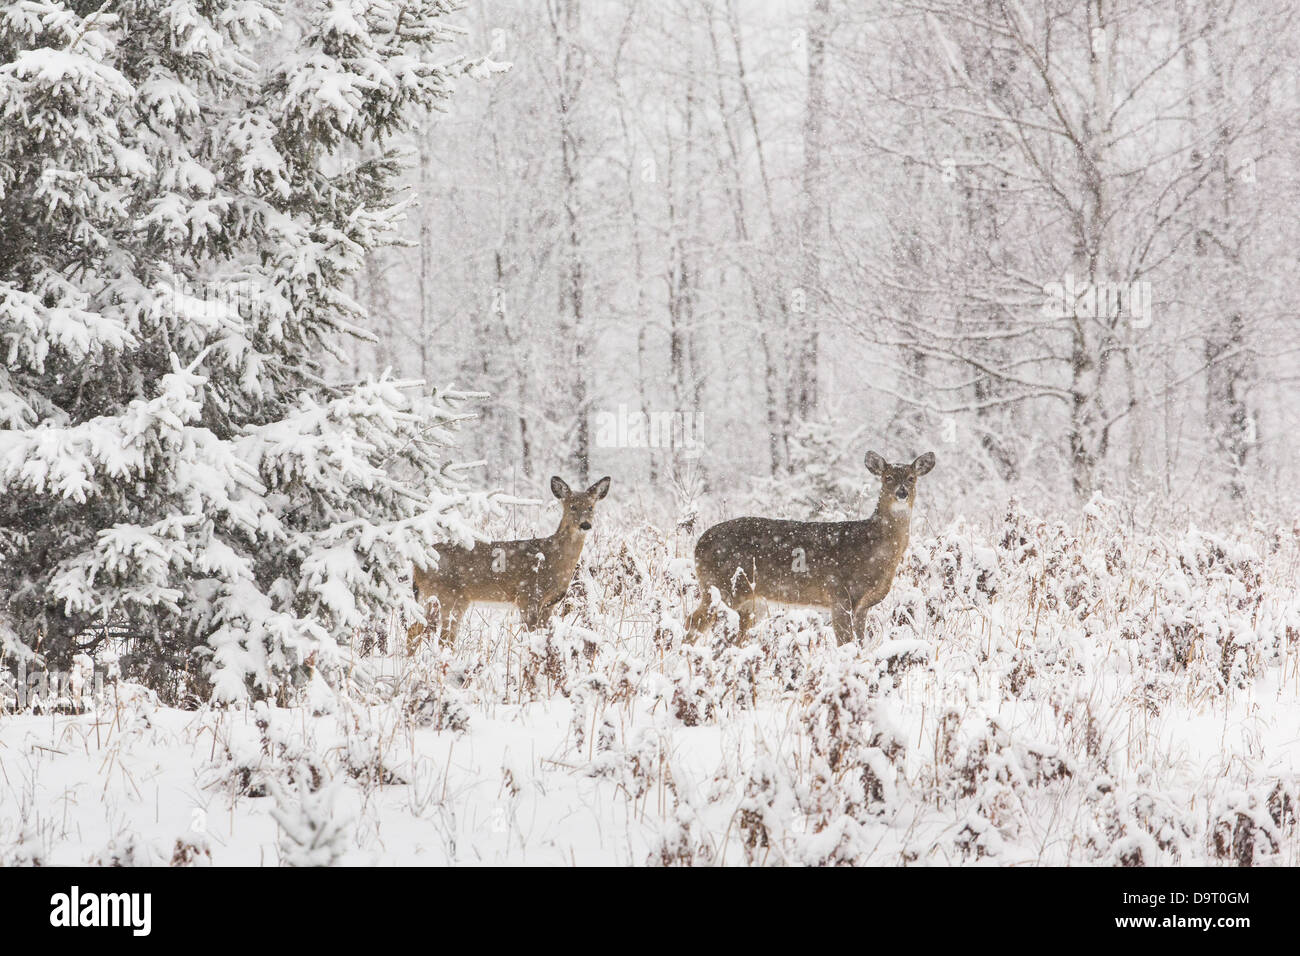 White-tailed deer during a snowstorm Stock Photo